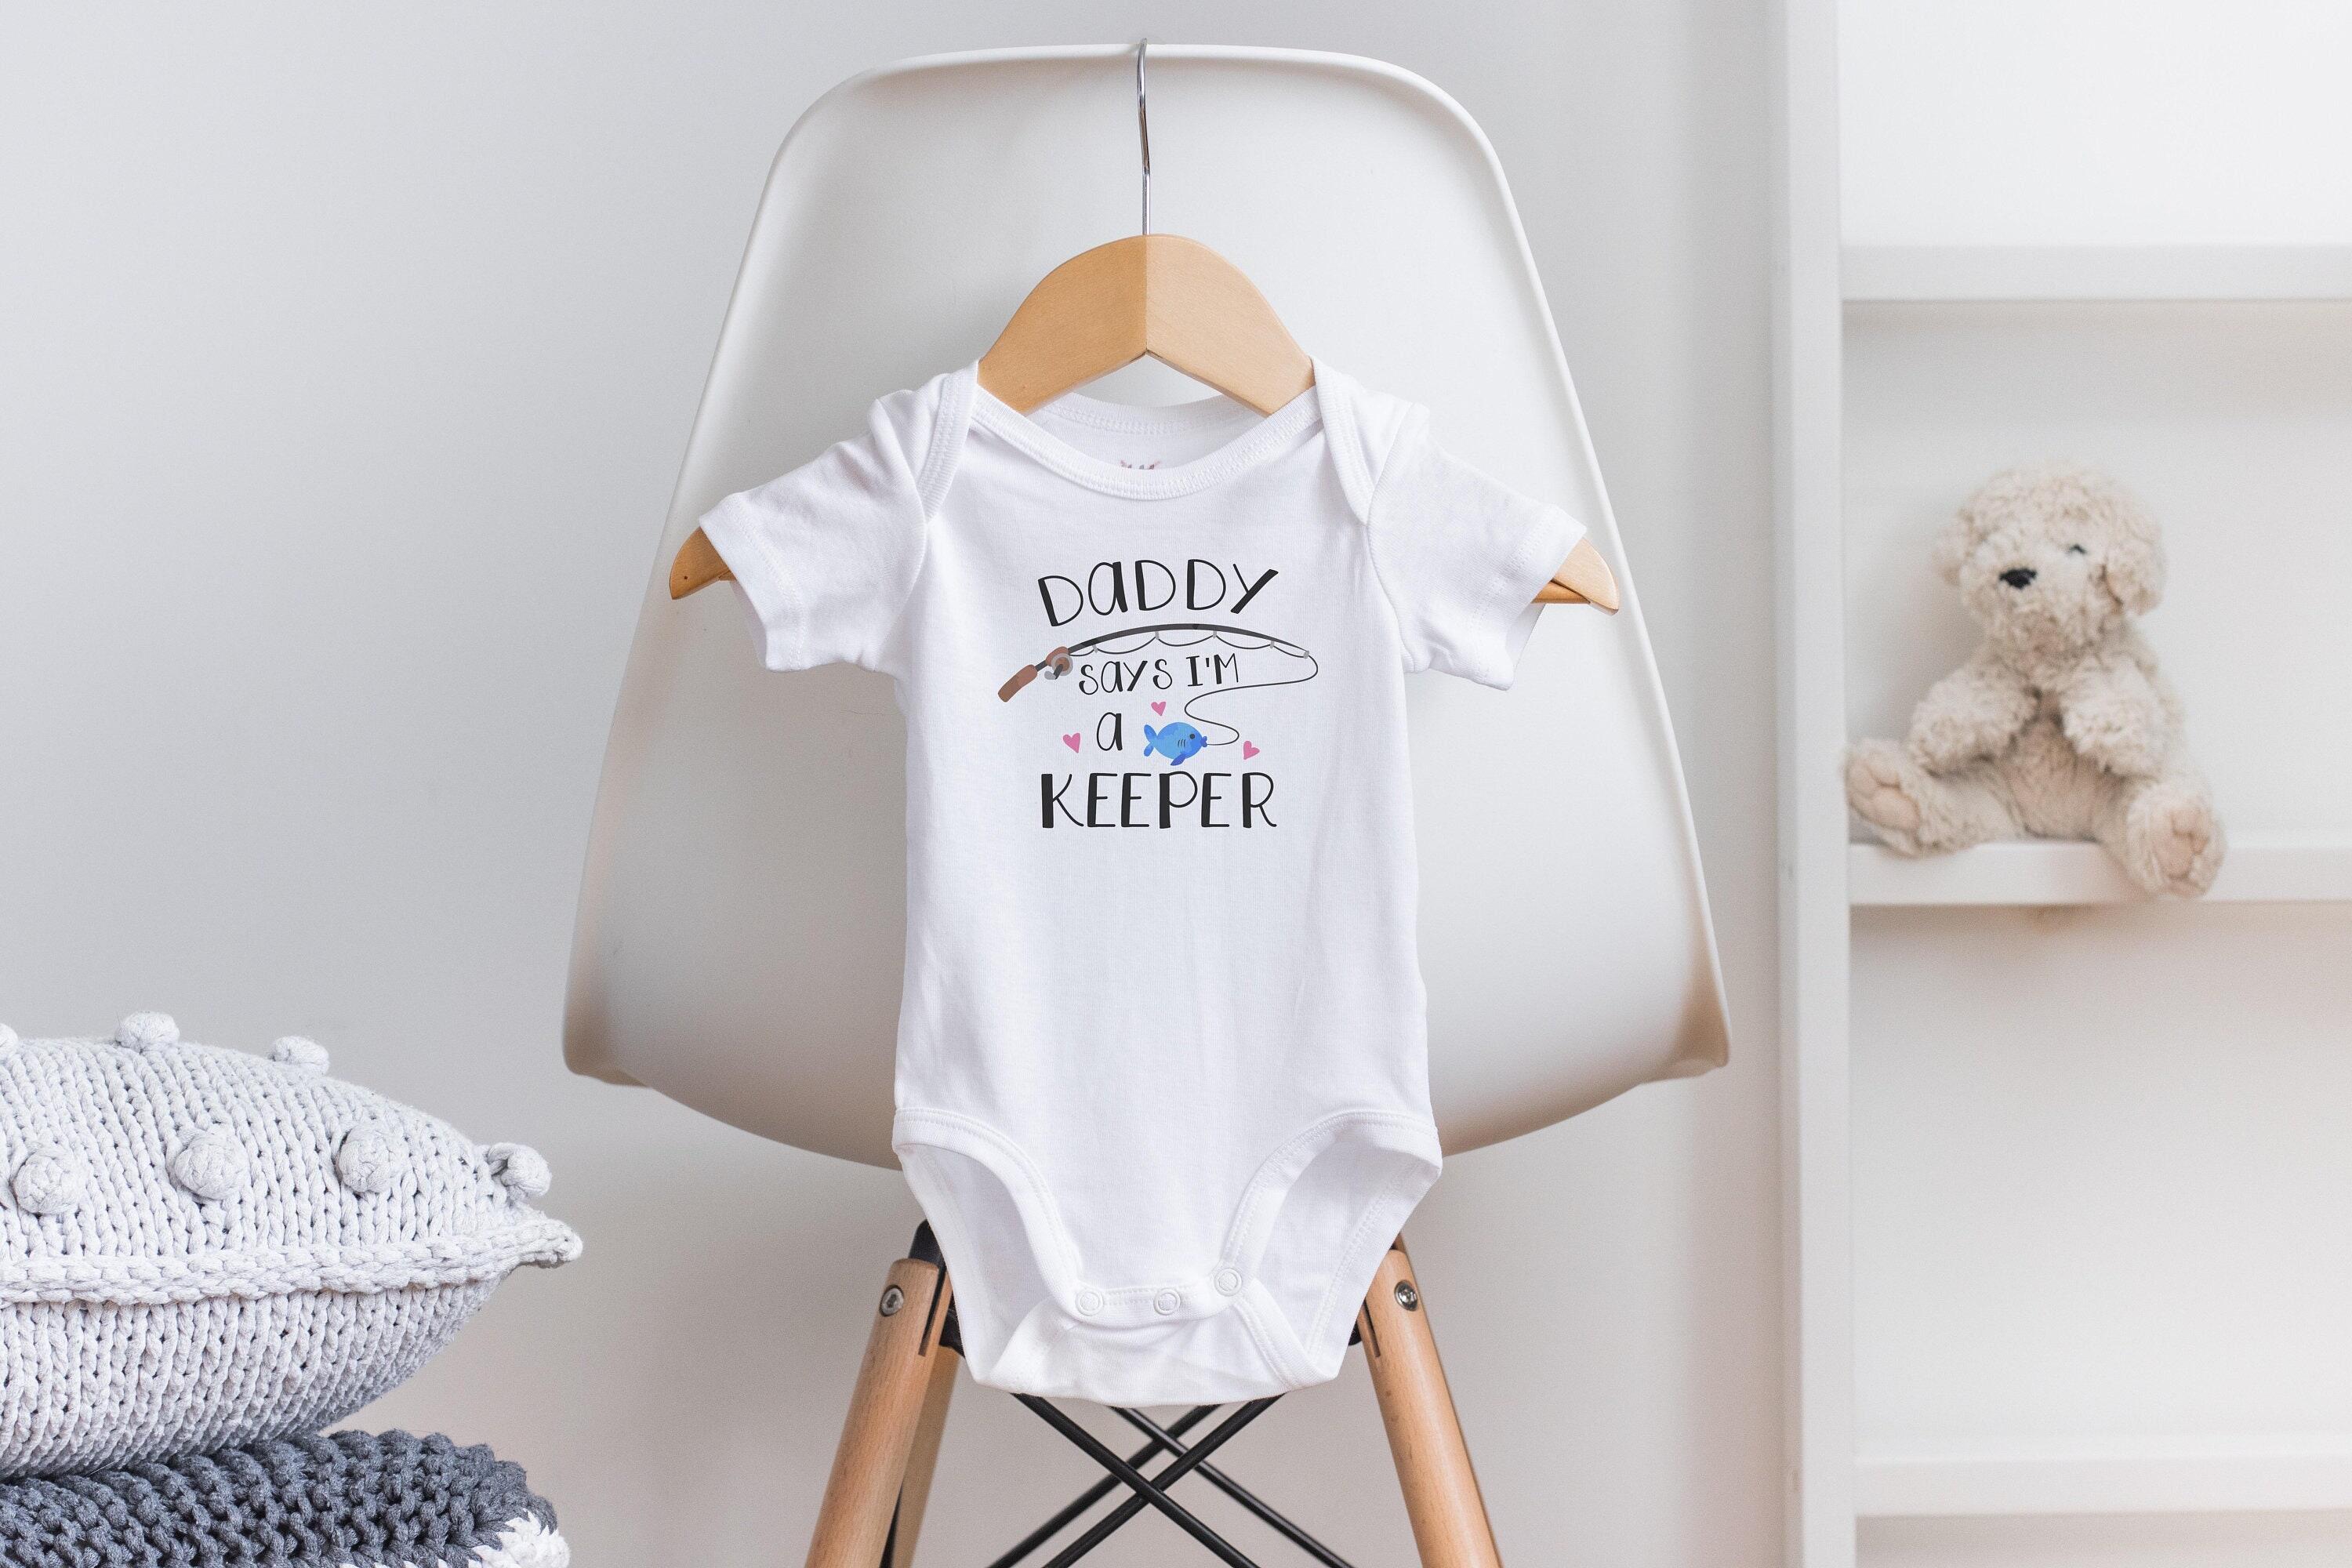 Clothing & Accessories :: Kids & Baby :: Baby Clothing :: Daddy Fishing  Buddy Onesie®, Baby Fishing Onesie®, Fishing Baby Clothing, Fishing Baby  Shower, Daddy Onesie®, Baby Girl Outfit